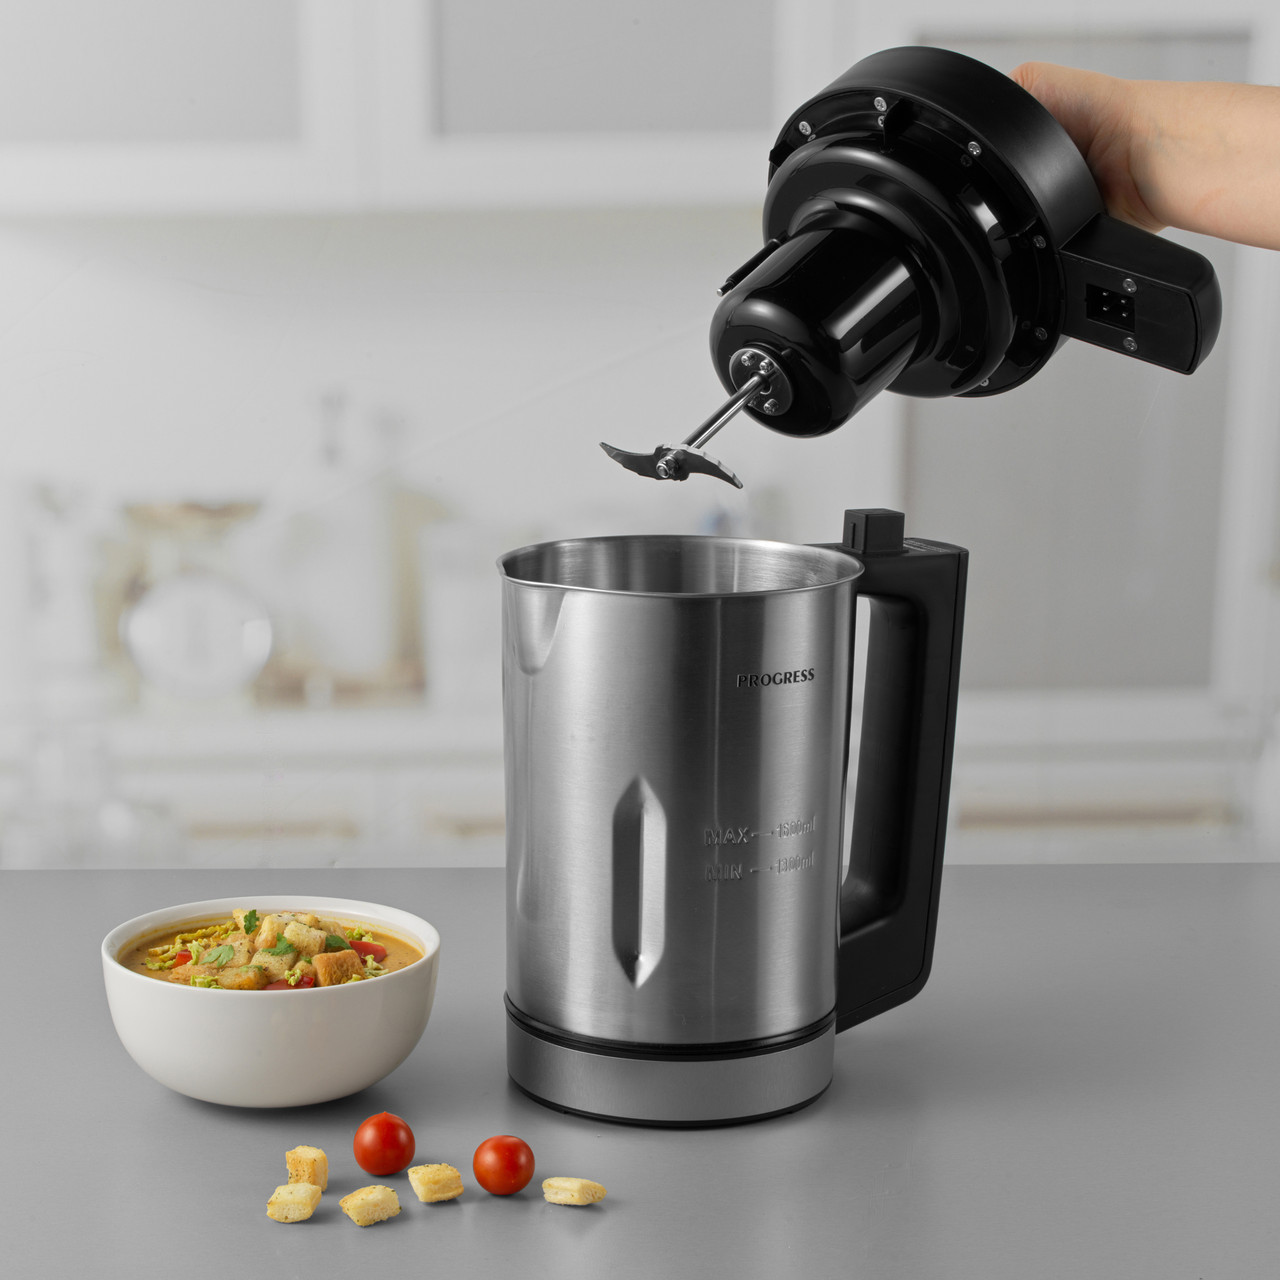 1.6L Soup Maker – 5 Pre-Set Functions, Stainless Steel, 900W